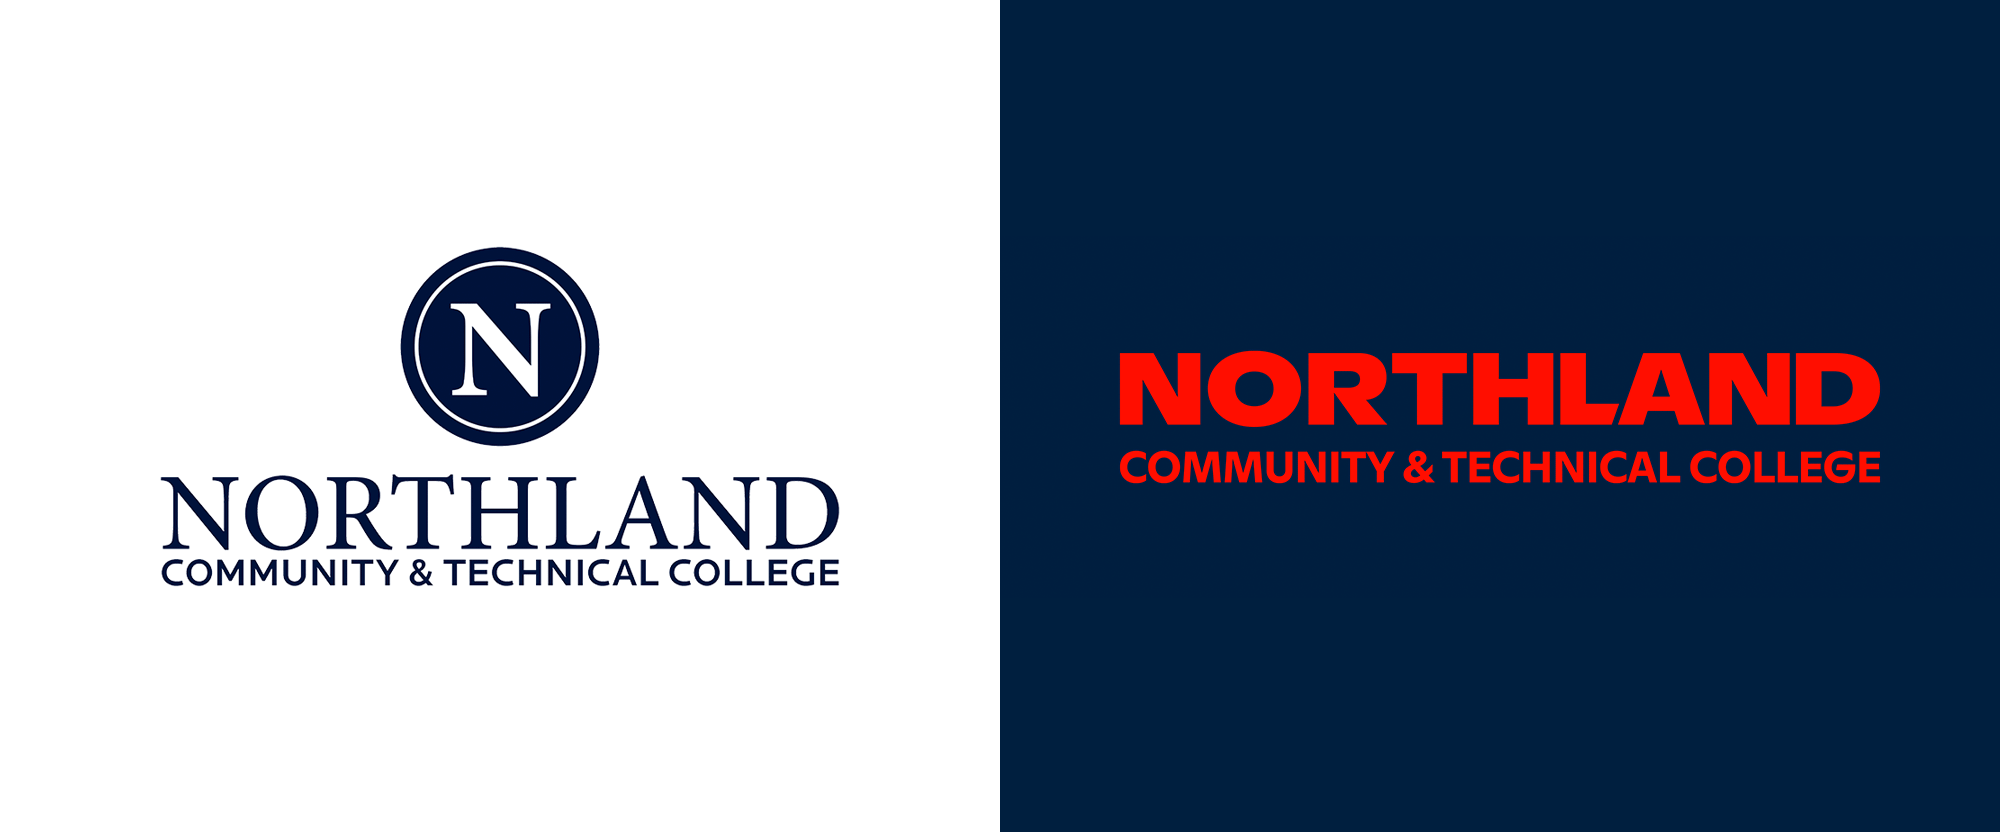 Brand New: New Logo and Identity for Northland Community College and ...